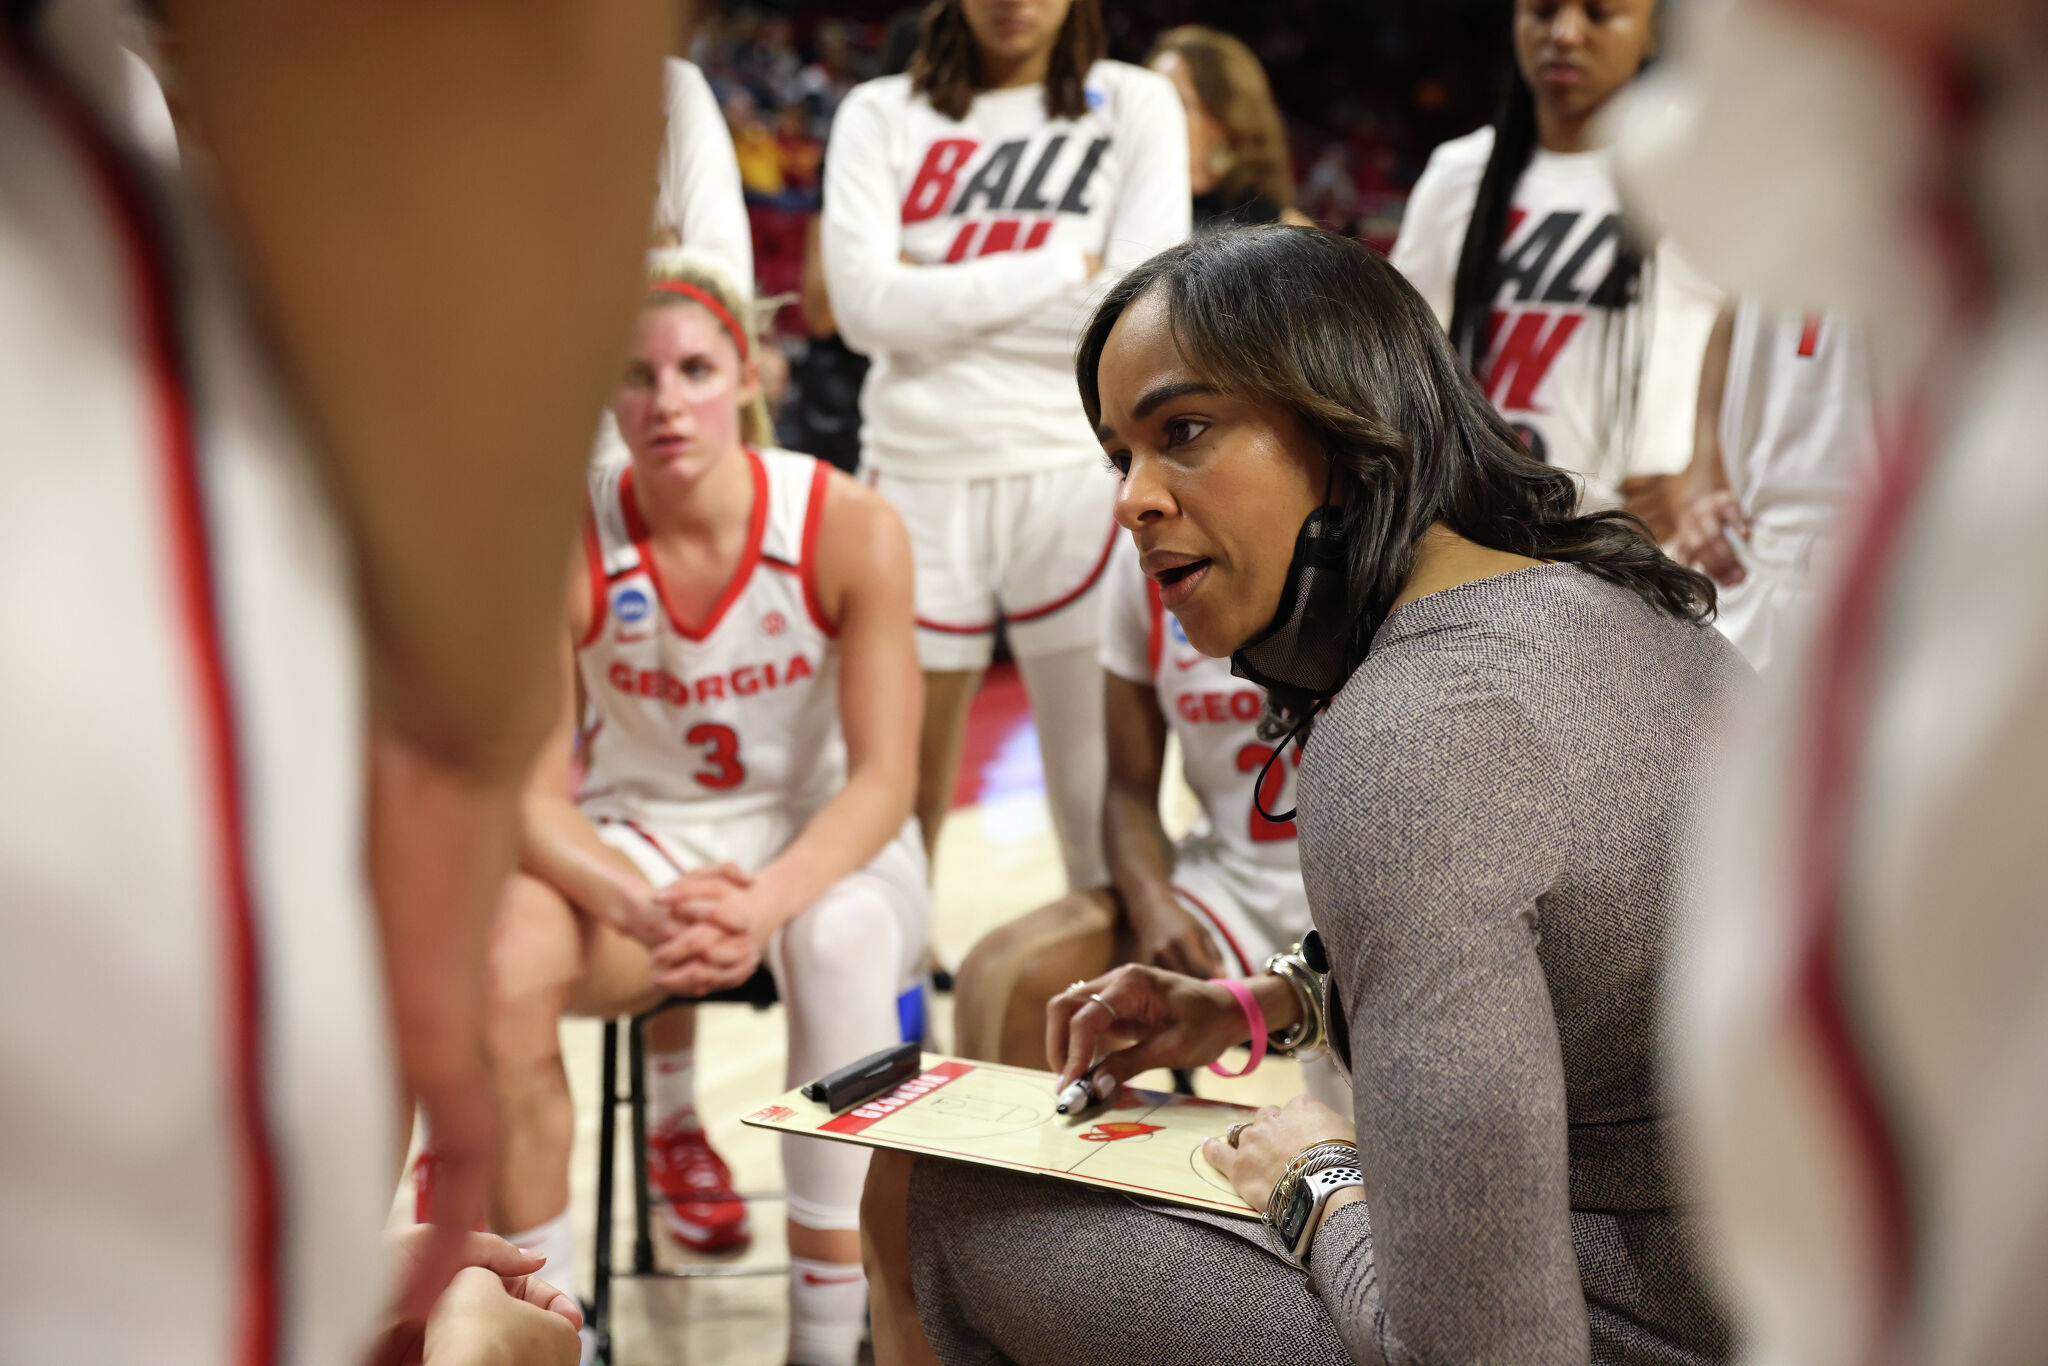 March Madness: Where are the young women's basketball coaches?